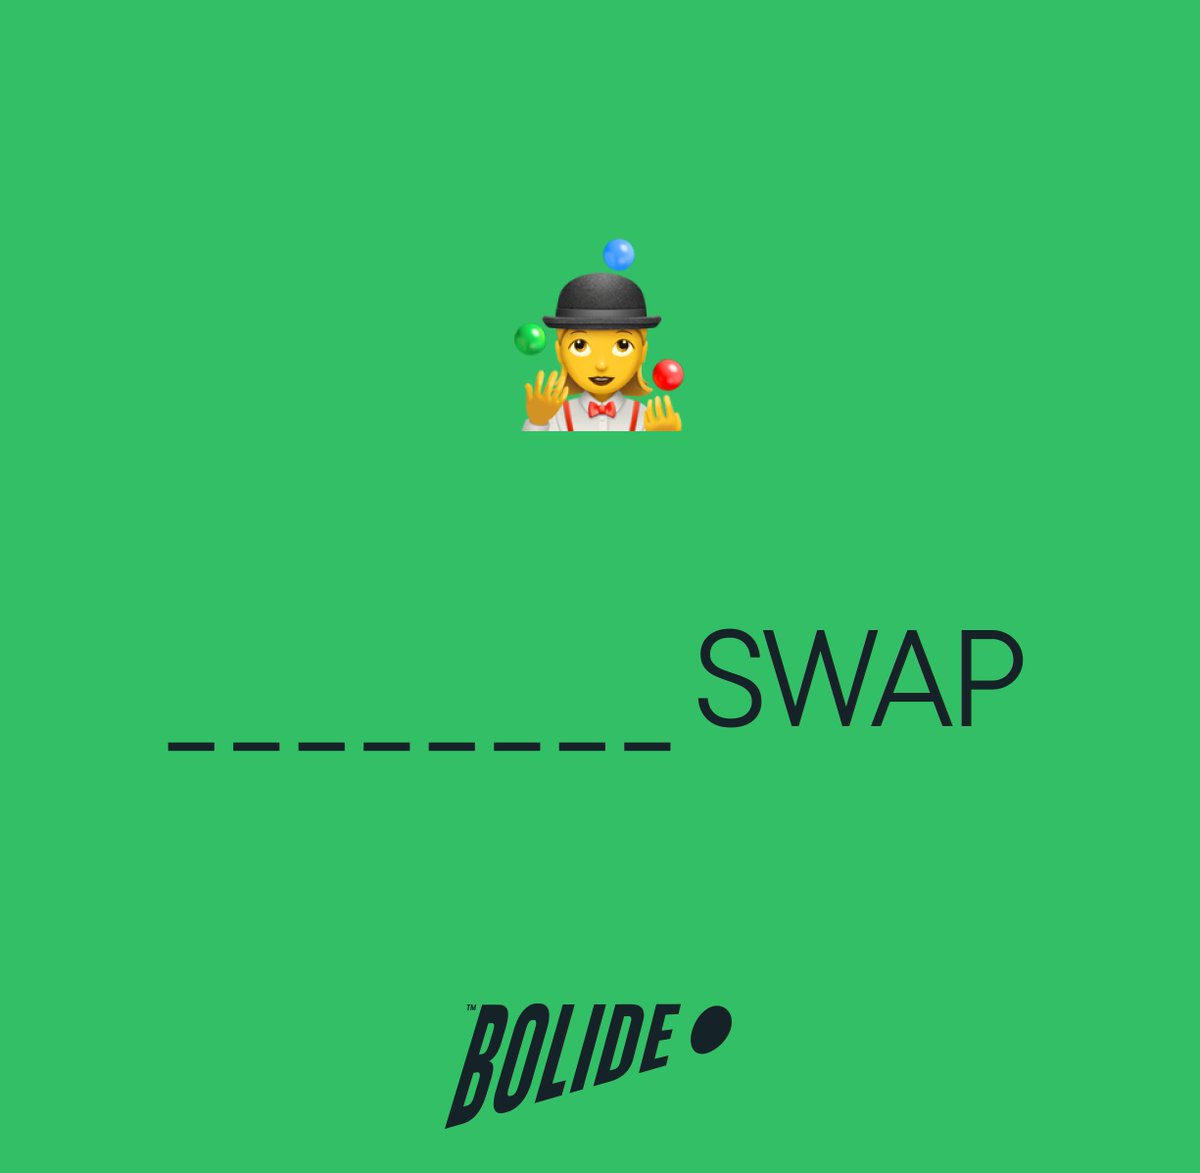 🧩 Solve and Win $BLID! 

Fill the space:

_ _ _ _ _ _ _ _ Swap

'A method used in the #DeFi sector to exchange one cryptocurrency for another, without the need for a traditional exchange or broker.'

Comment your answer and tag @Bolide_fi.
Winner will be picked in 24 hours 👀